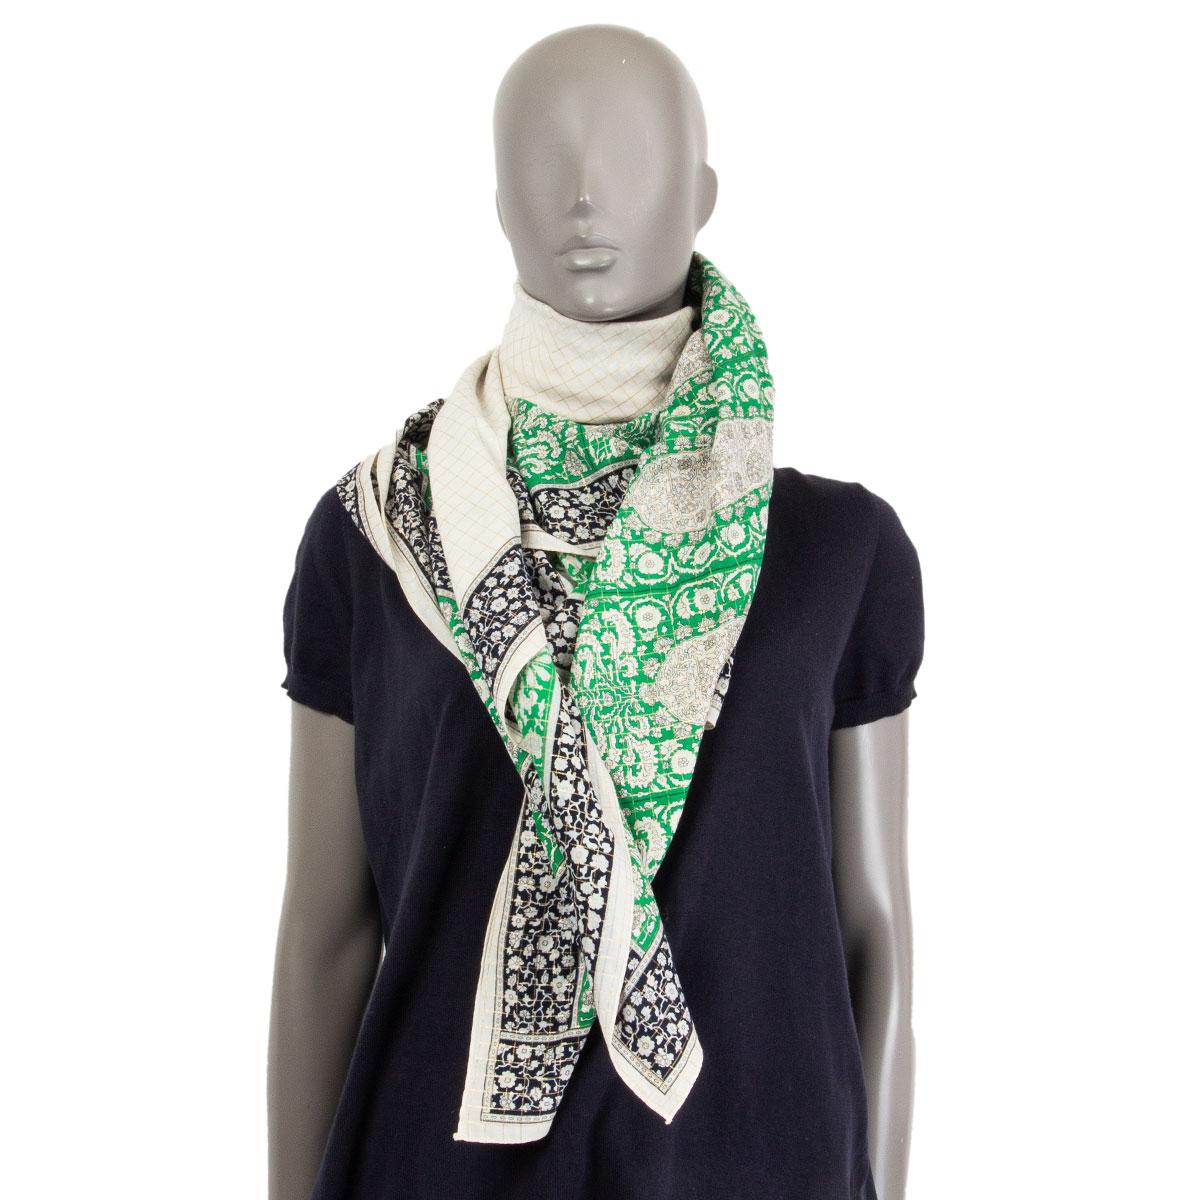 100% authentic Yves Saint Laurent Vintage floral print scarf in light grey, green and midnight and golden lurex cotton (100%). Has been worn and is in excellent condition. 

Width 129cm (50.3in)
Height 130cm (50.7in)

All our listings include only